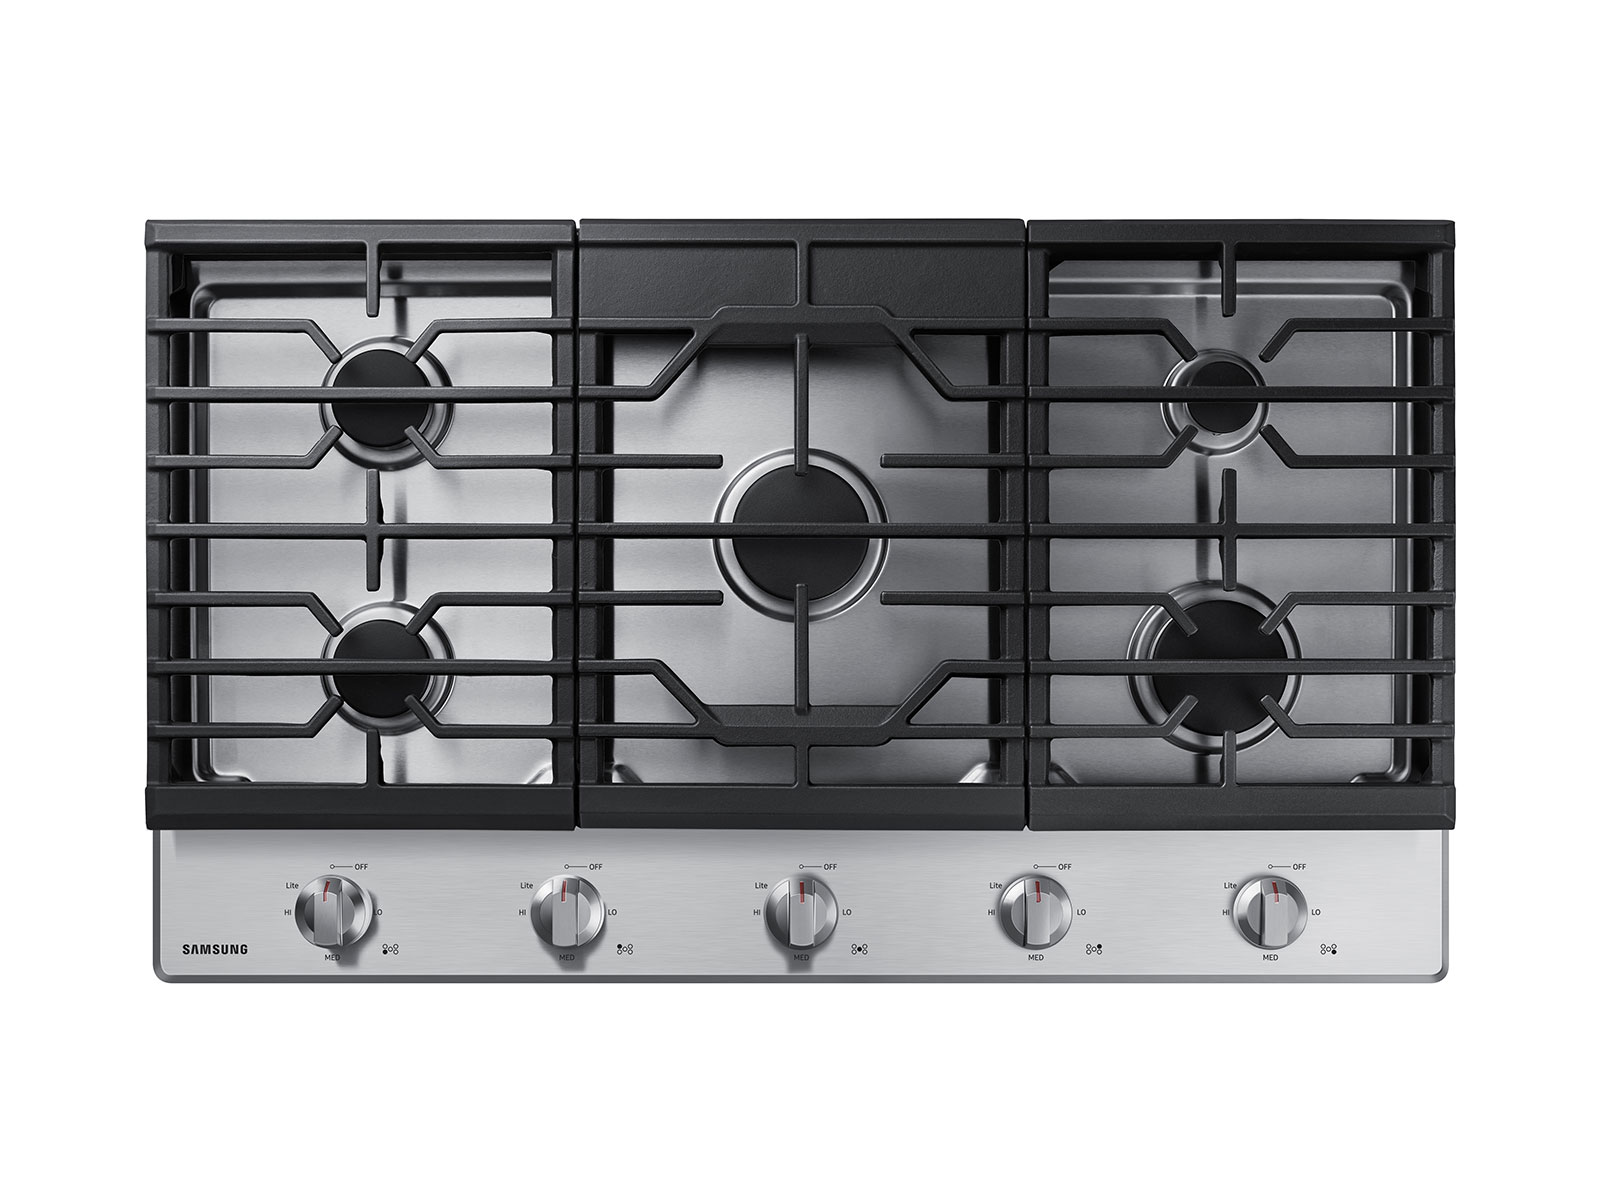 36 inch Gas Cooktop in Stainless Steel Cooktop - NA36R5310FS